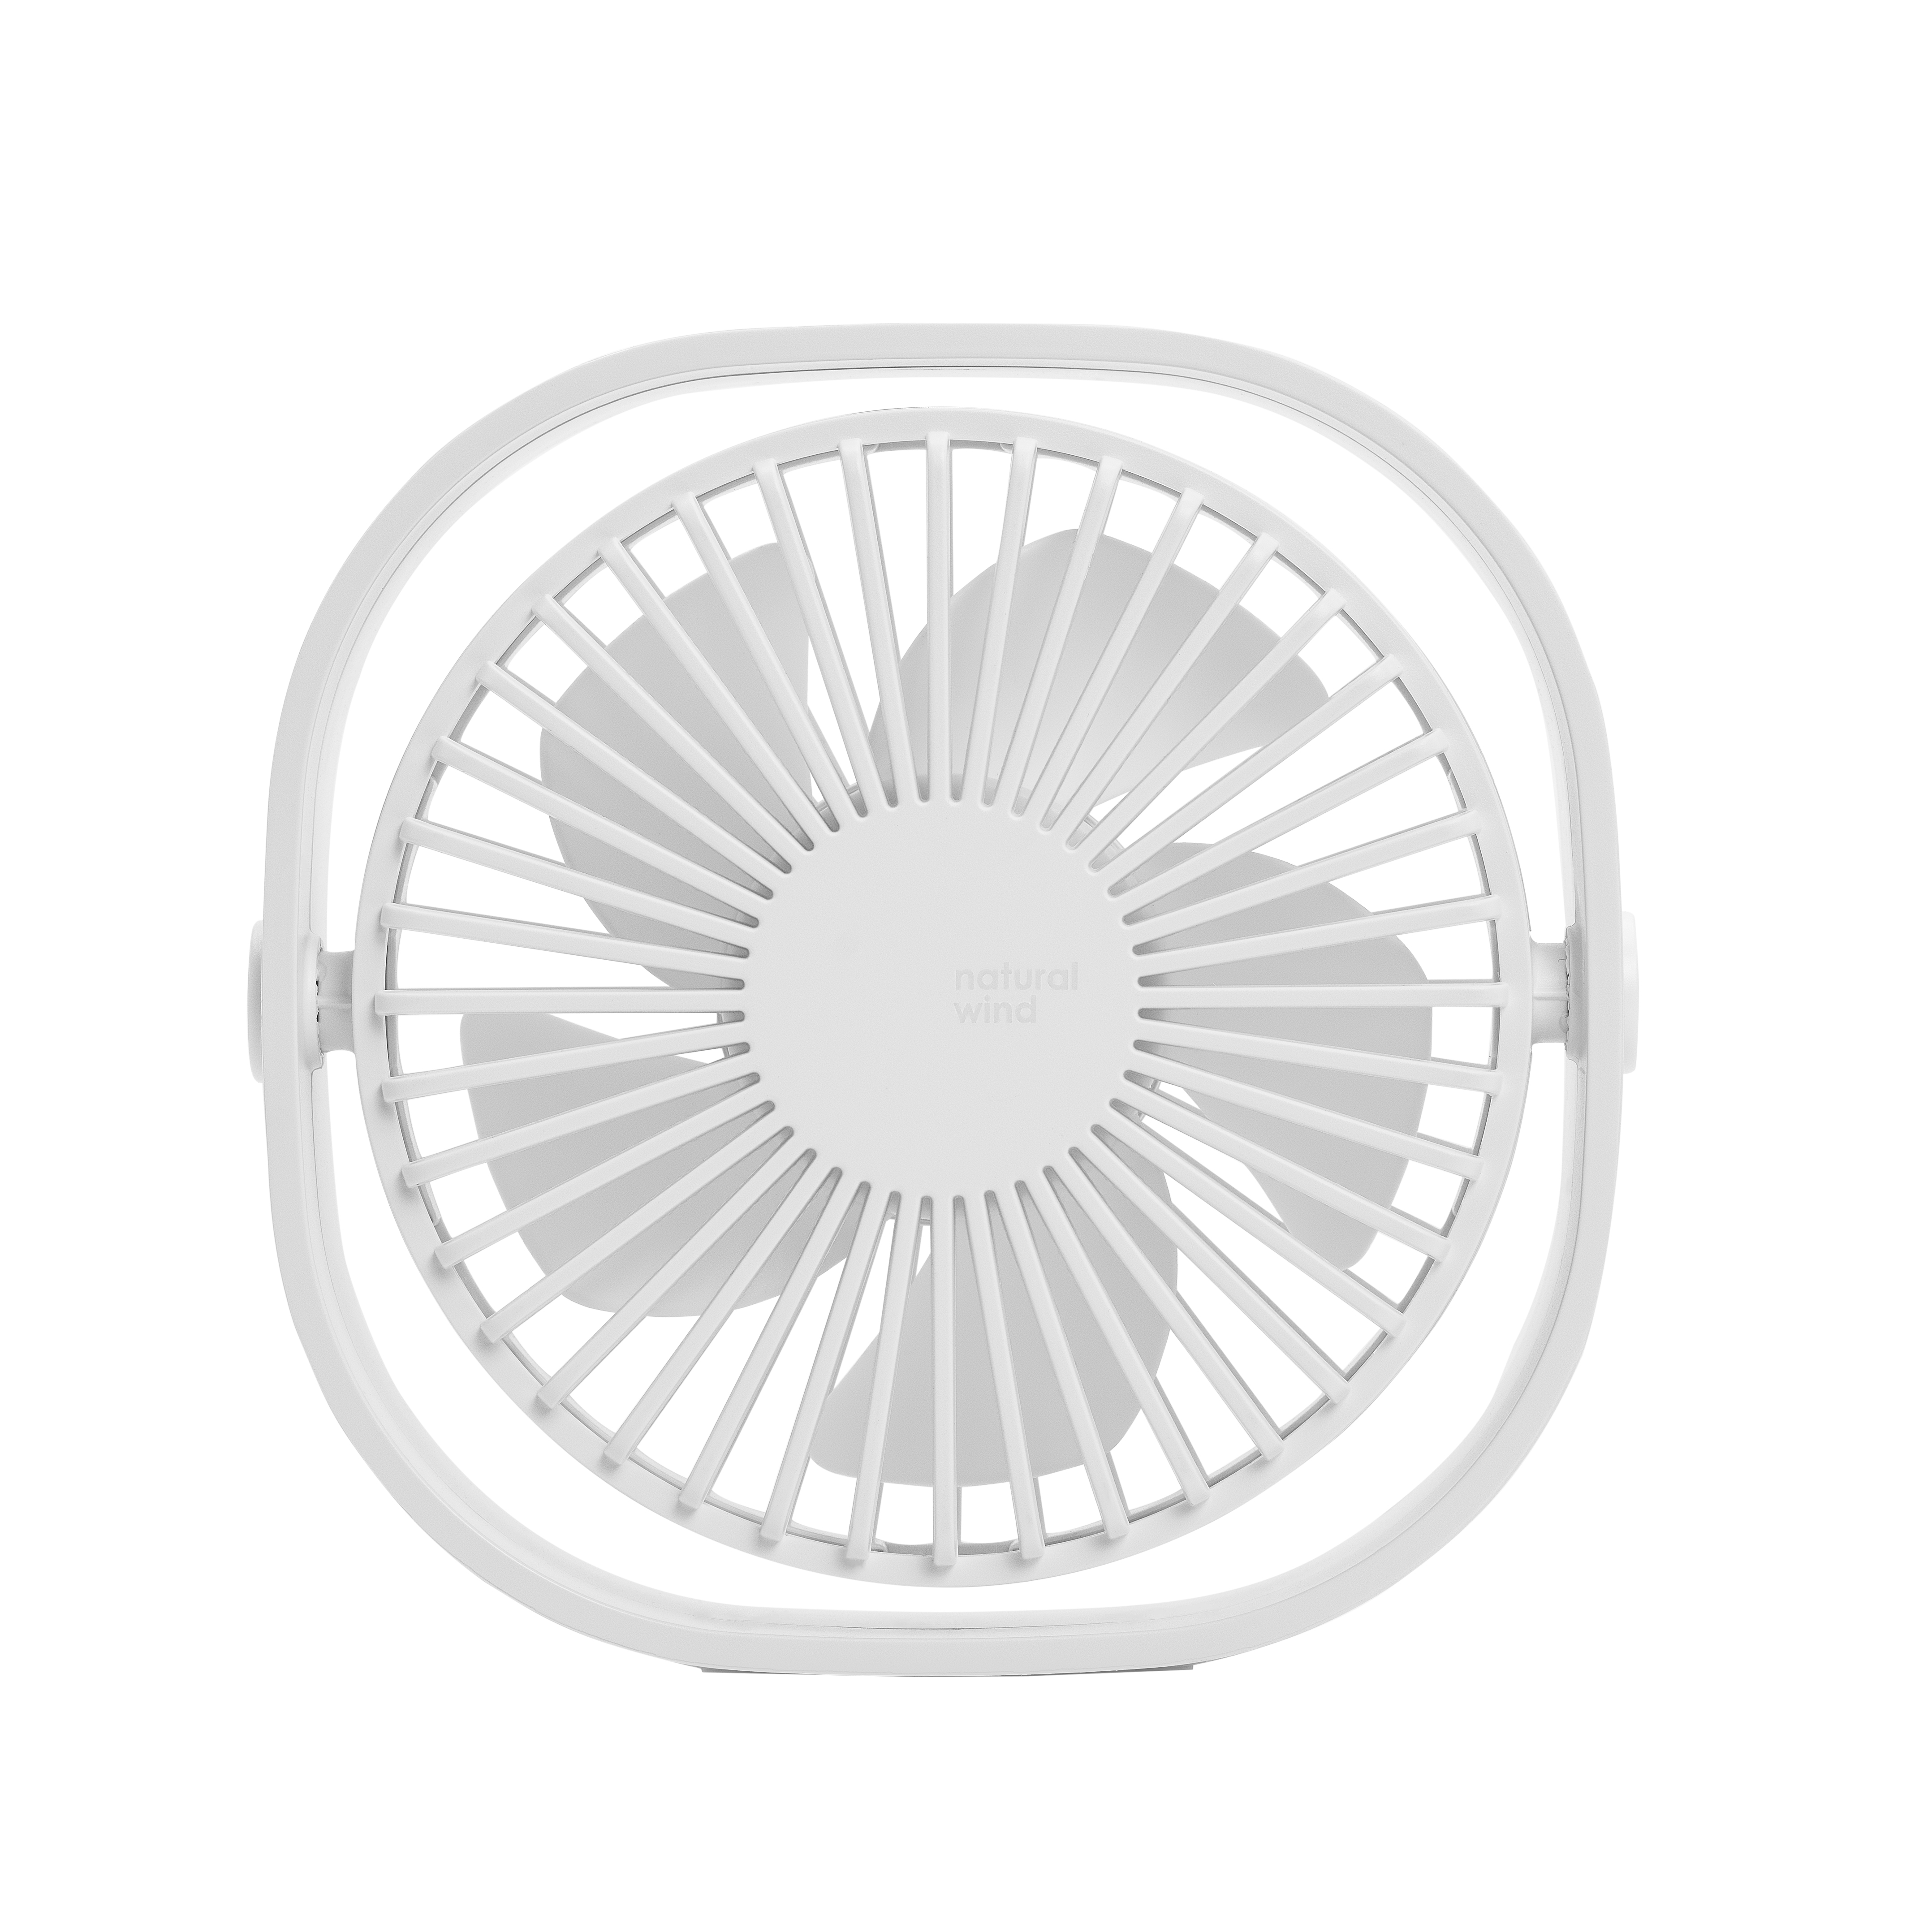 BREEZE table fan with USB connection